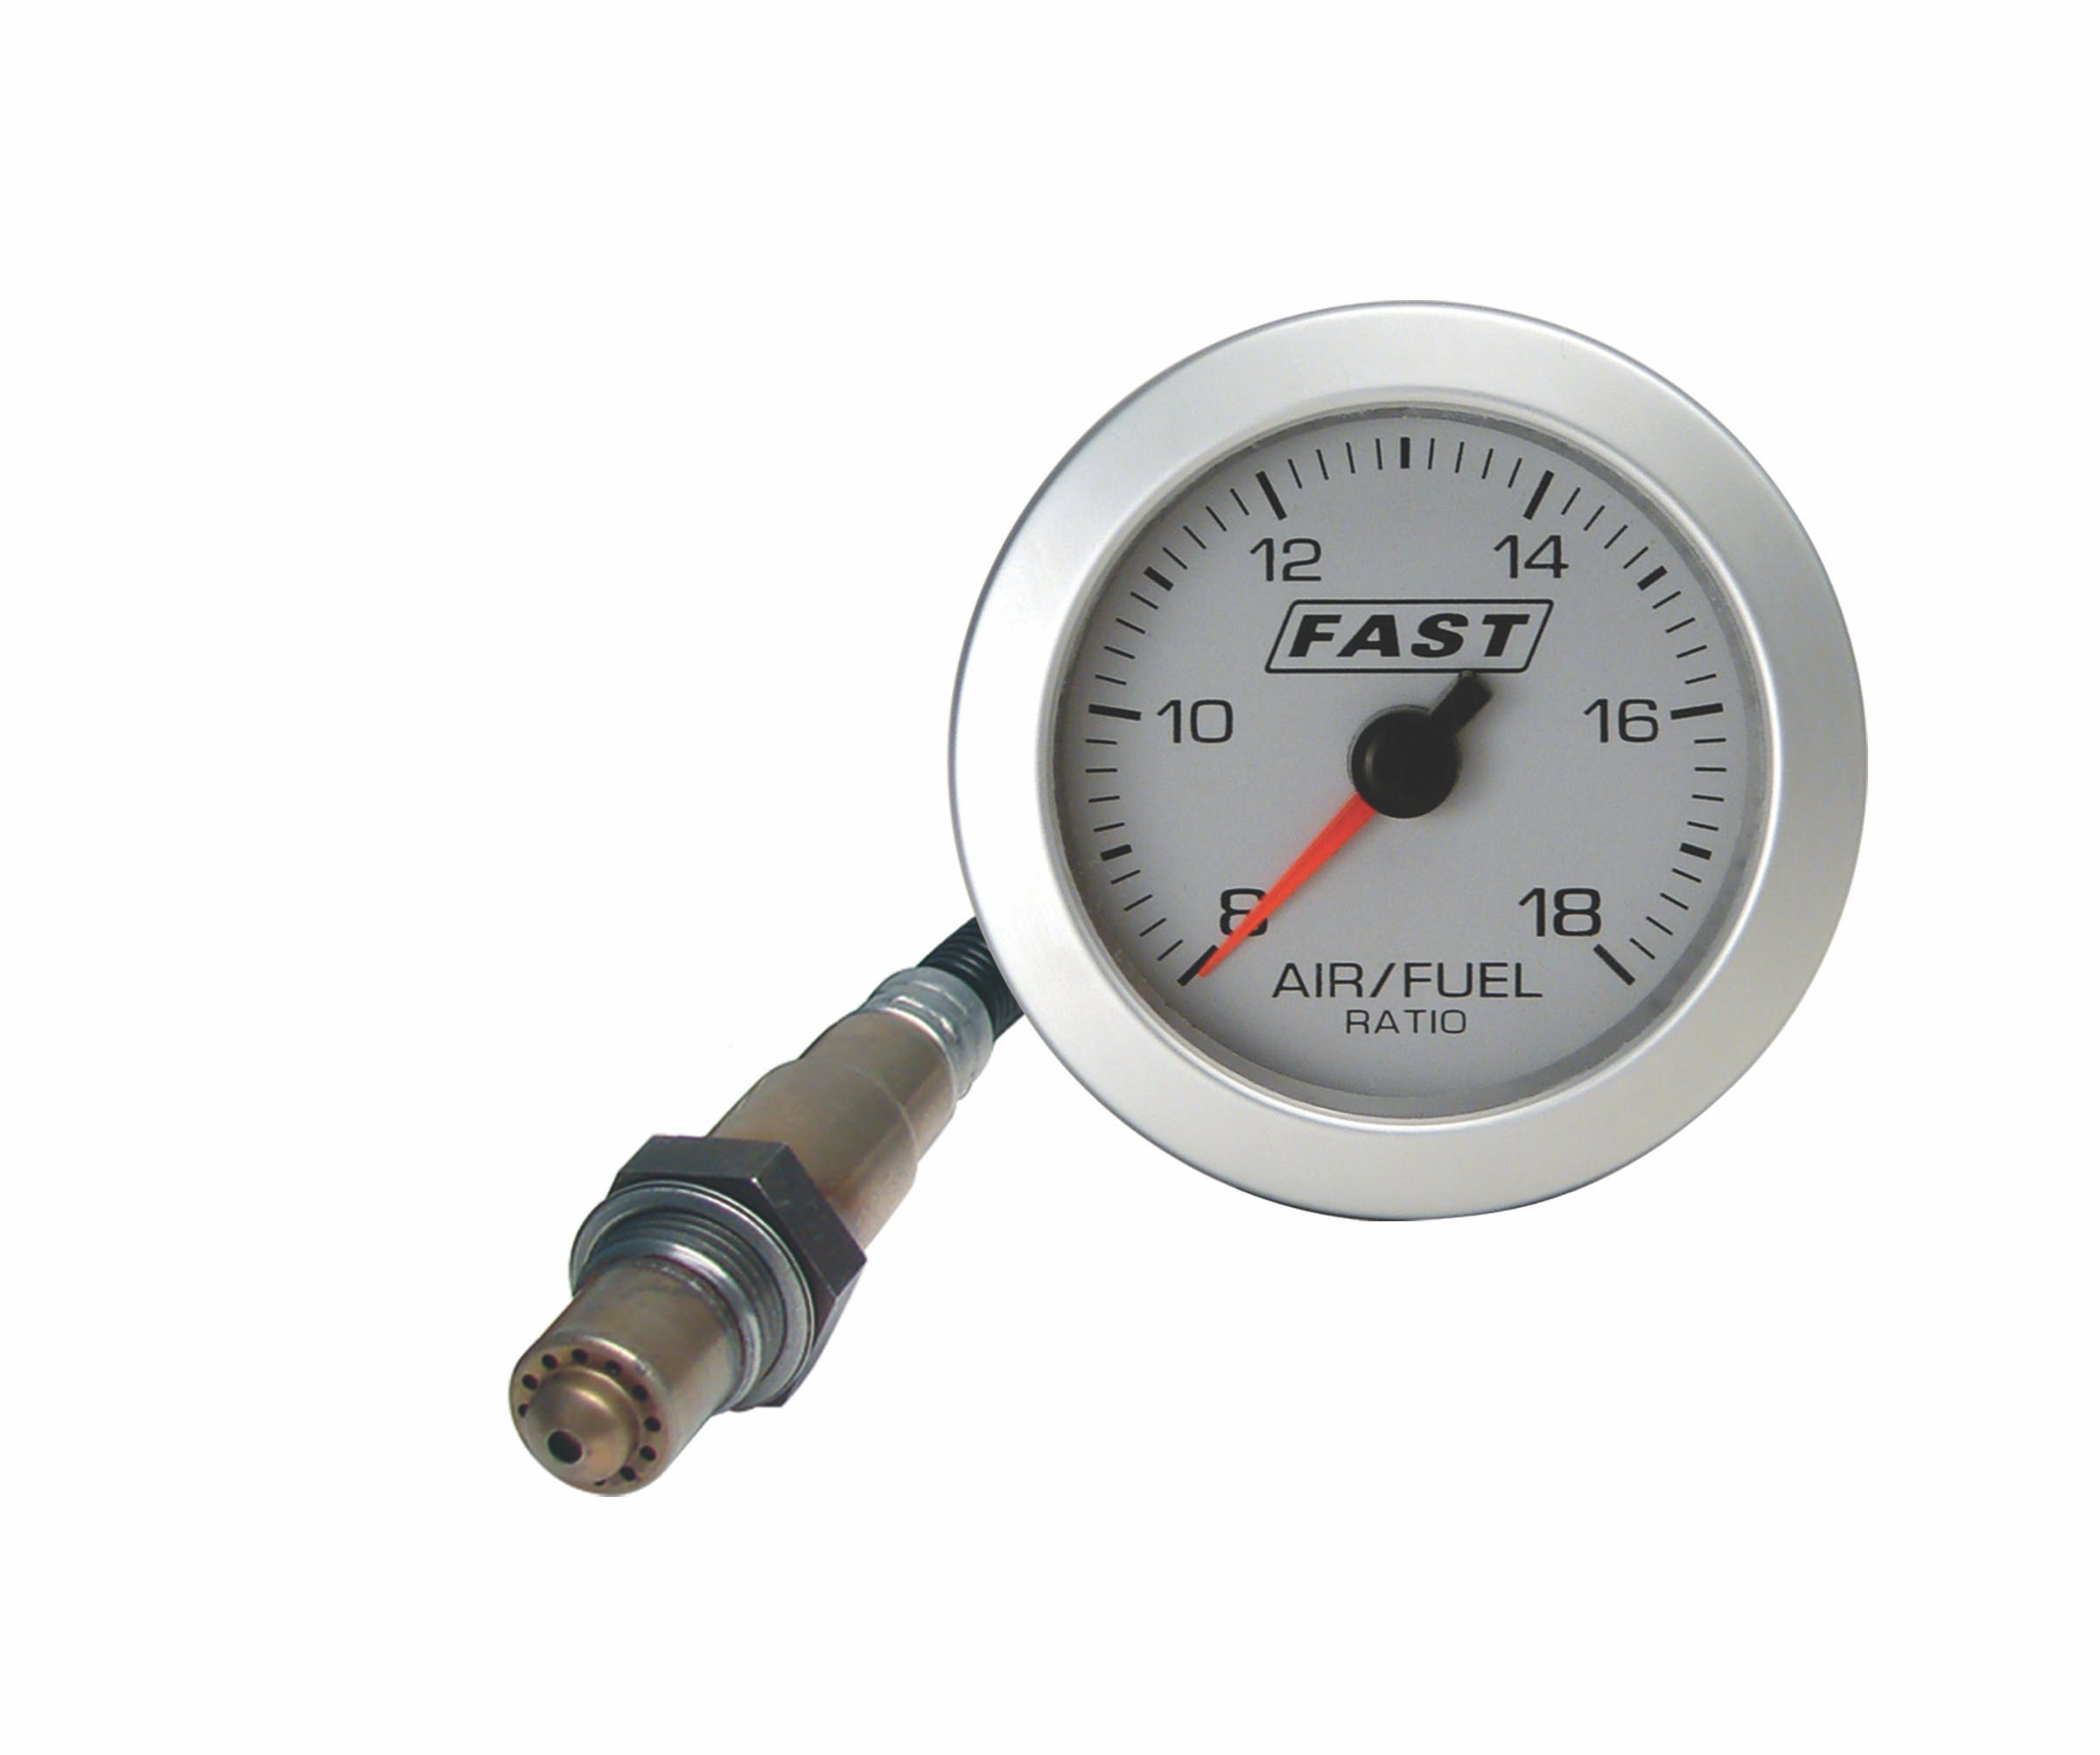 FAST - Fuel Air Spark Technology 170634 2 and 1/16 A/F Gauge